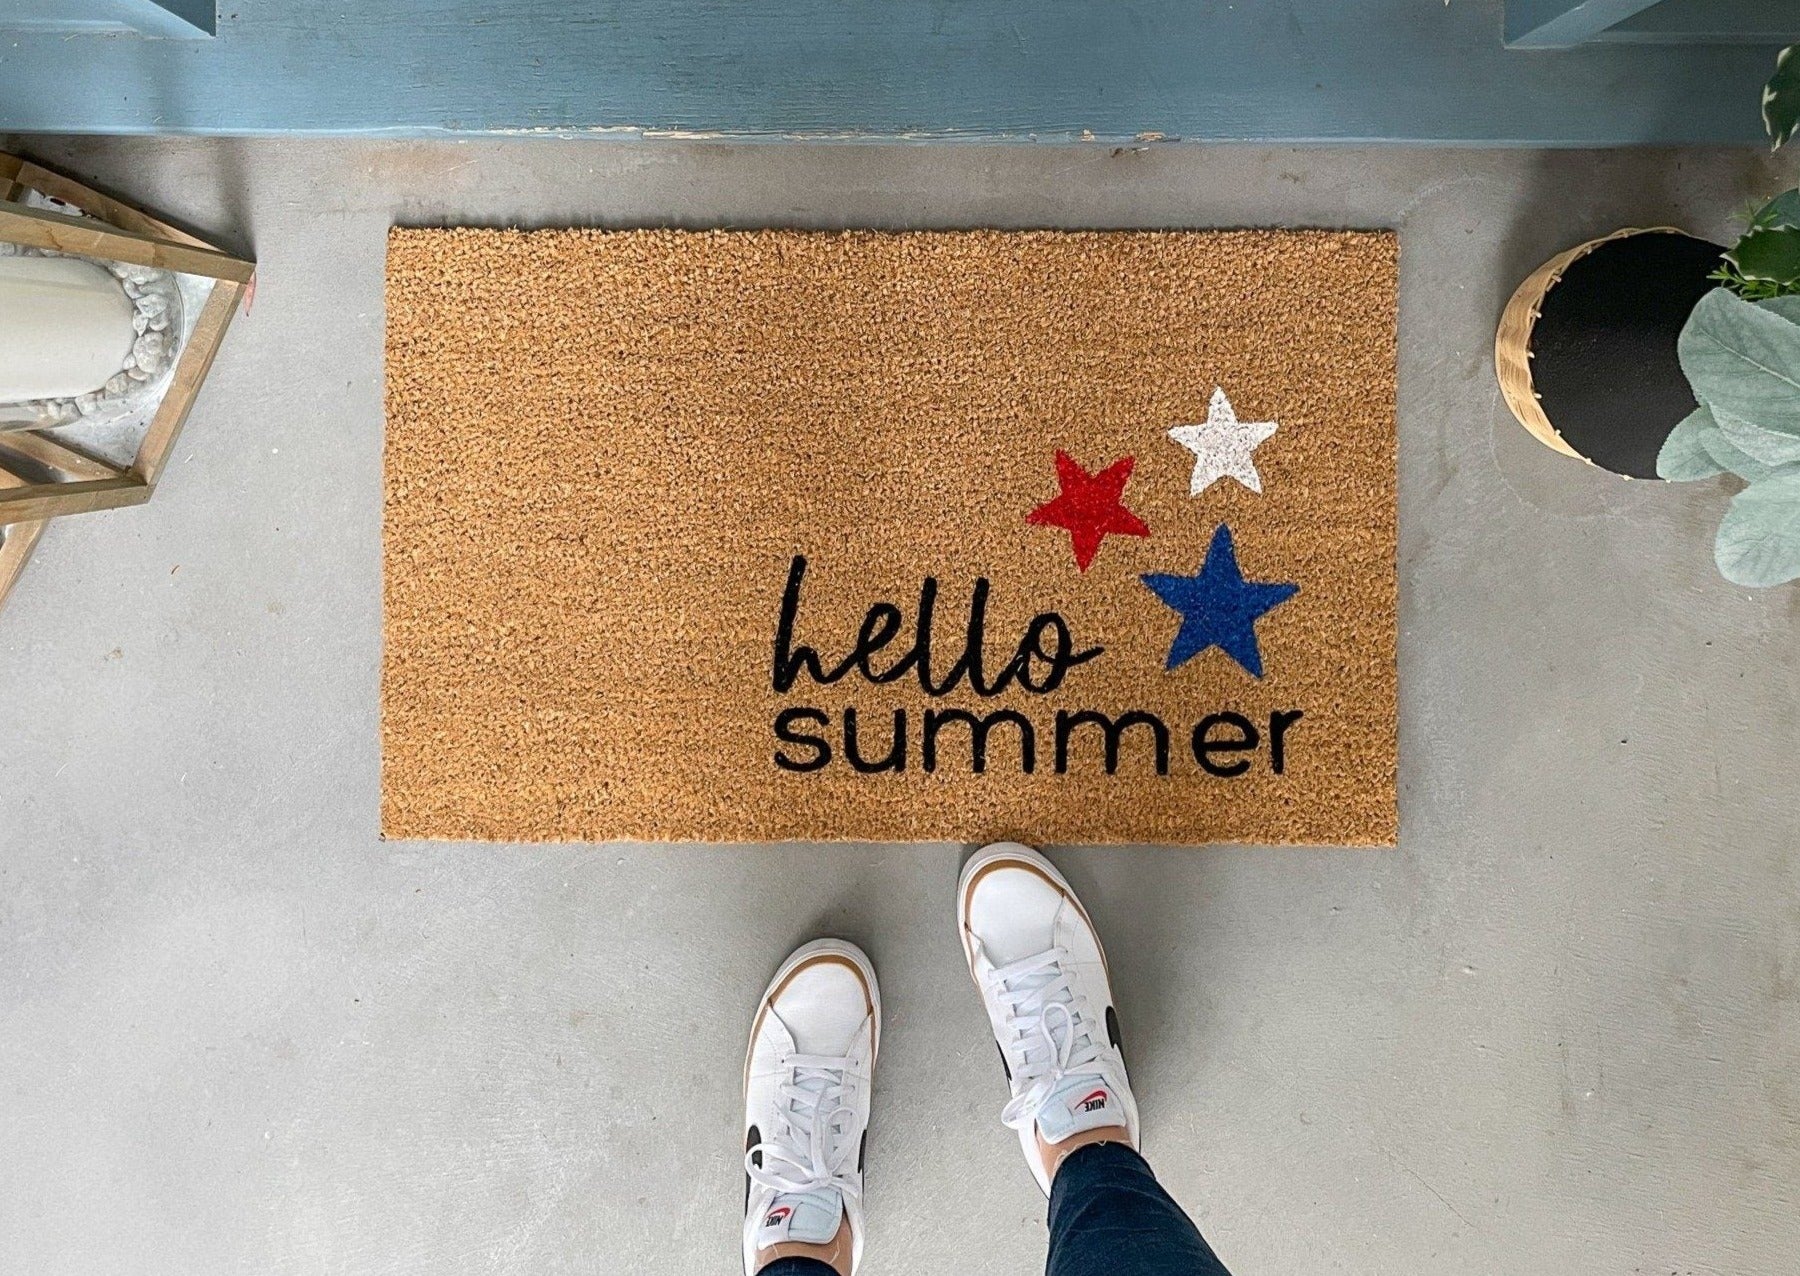 Nautical Beach Doormats that Bring Color to your Step